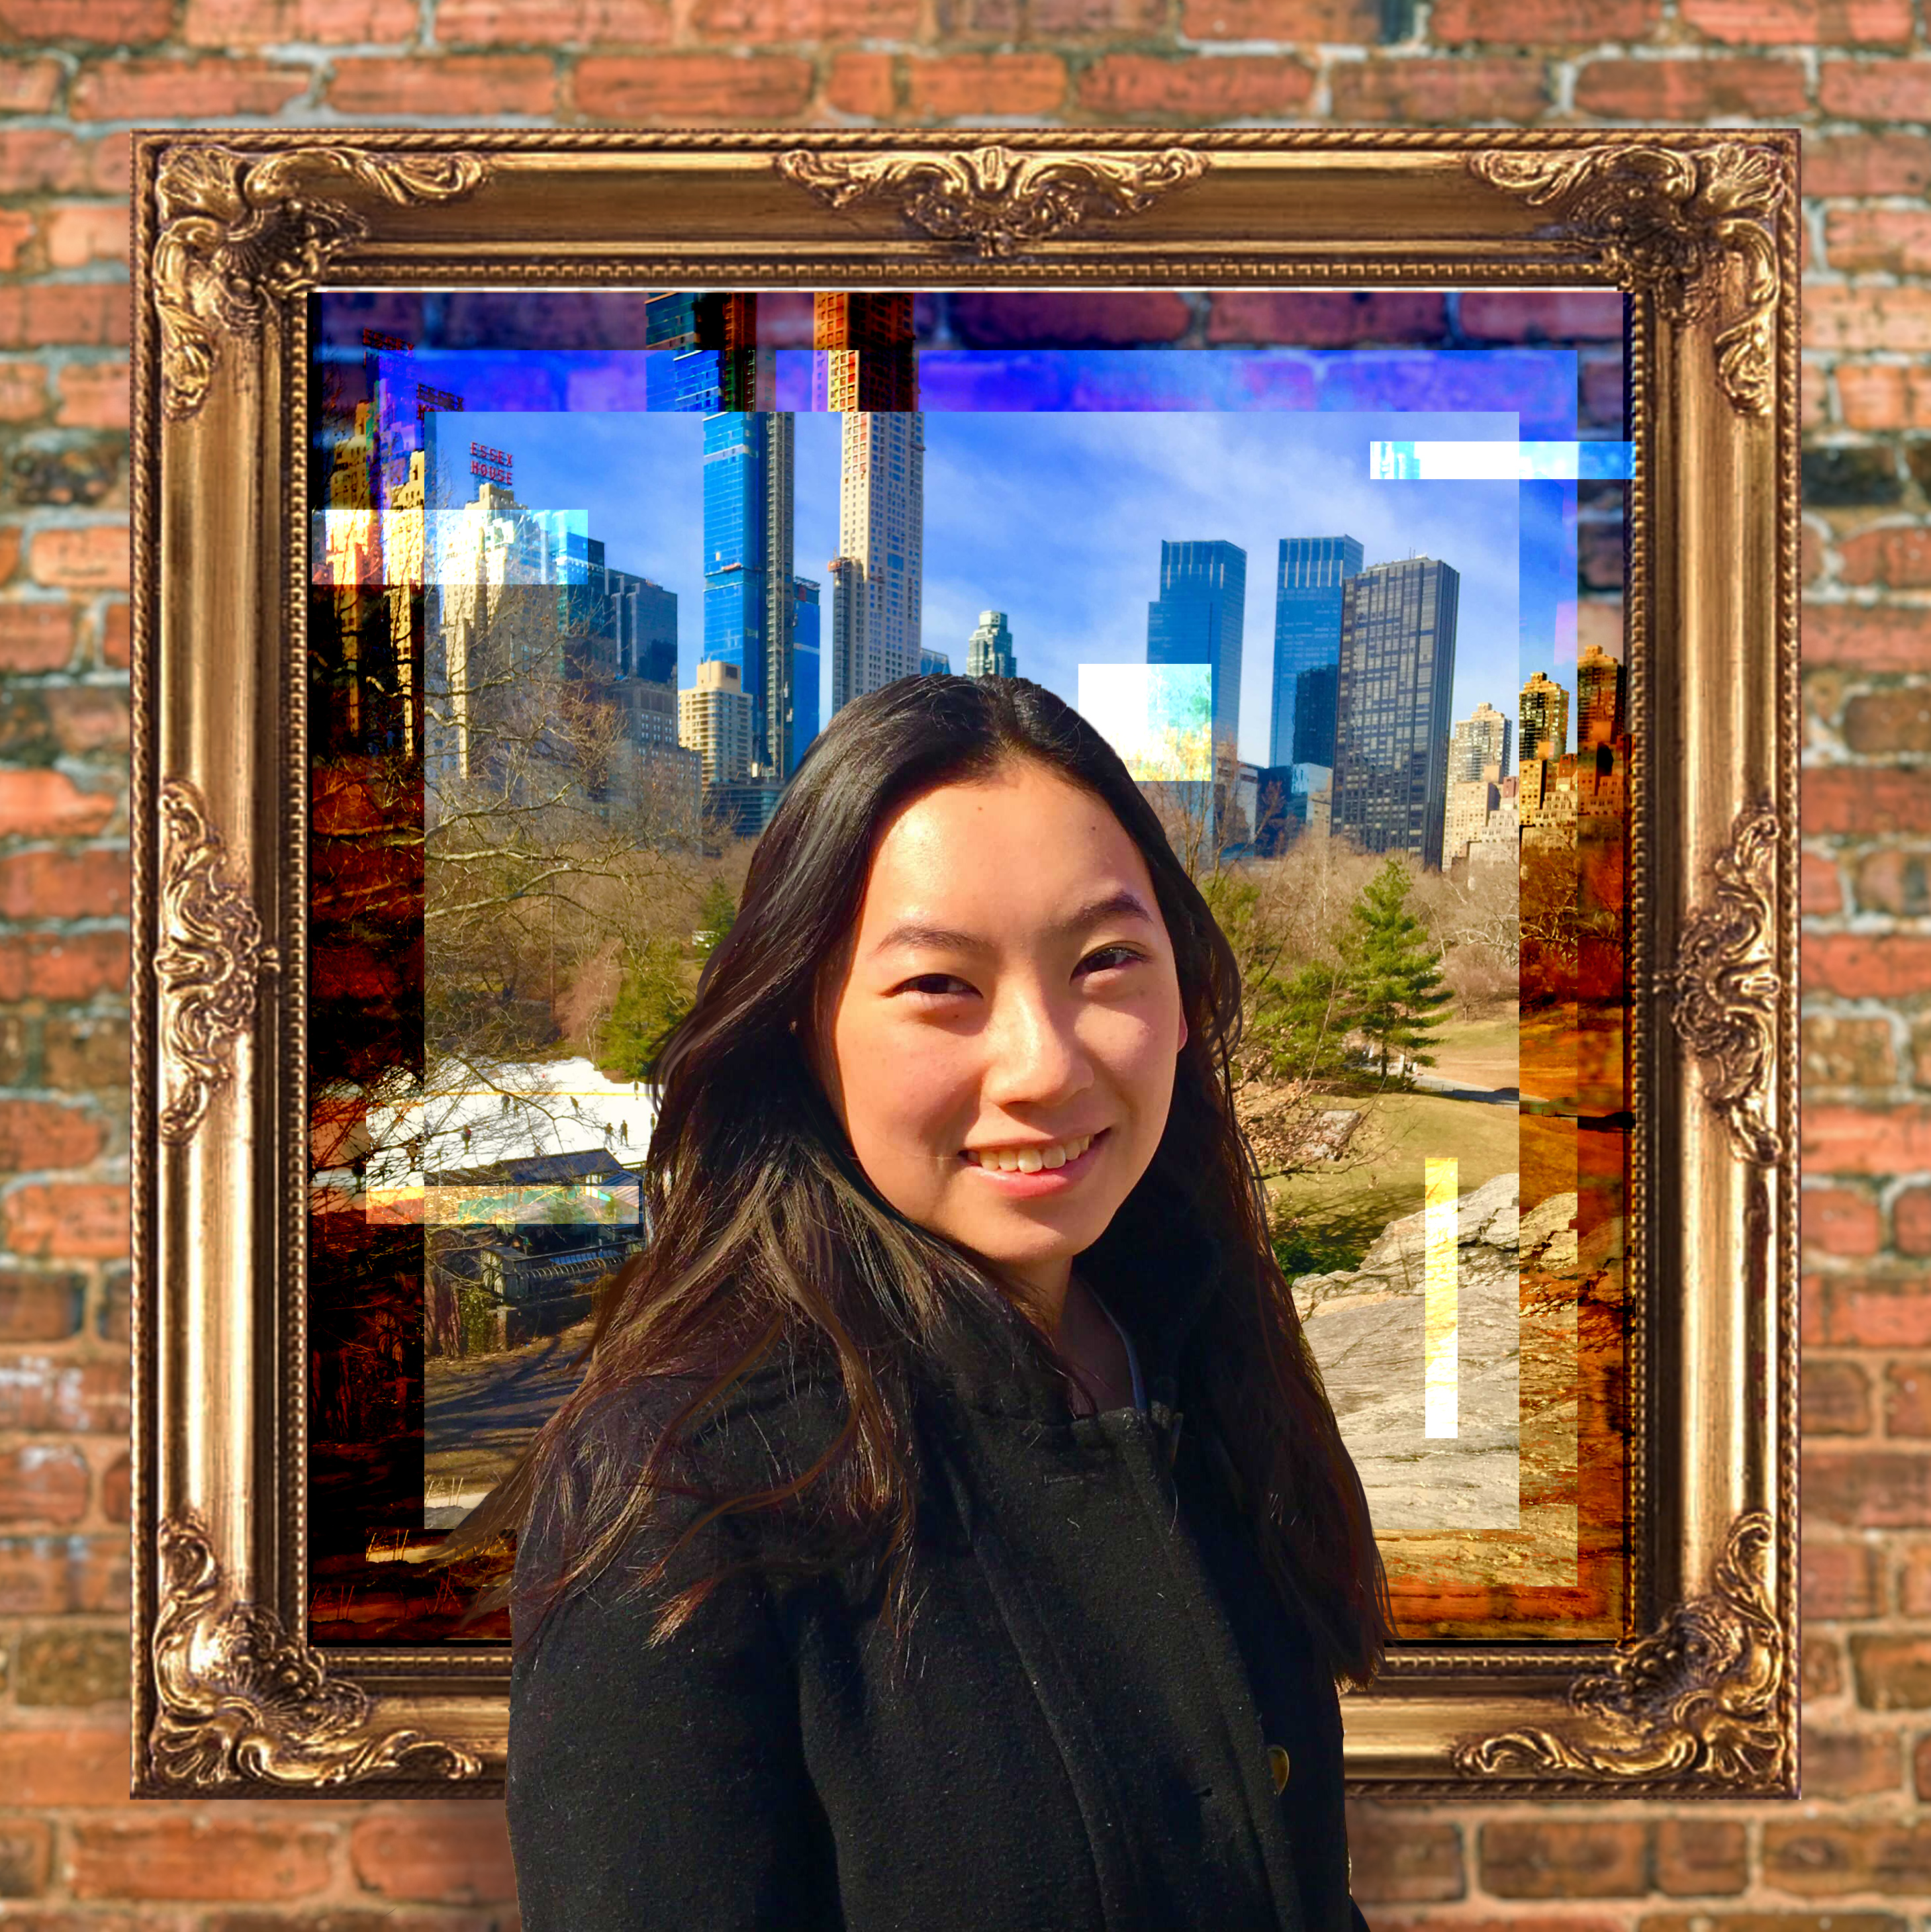 Photoshop picture of me from NYC